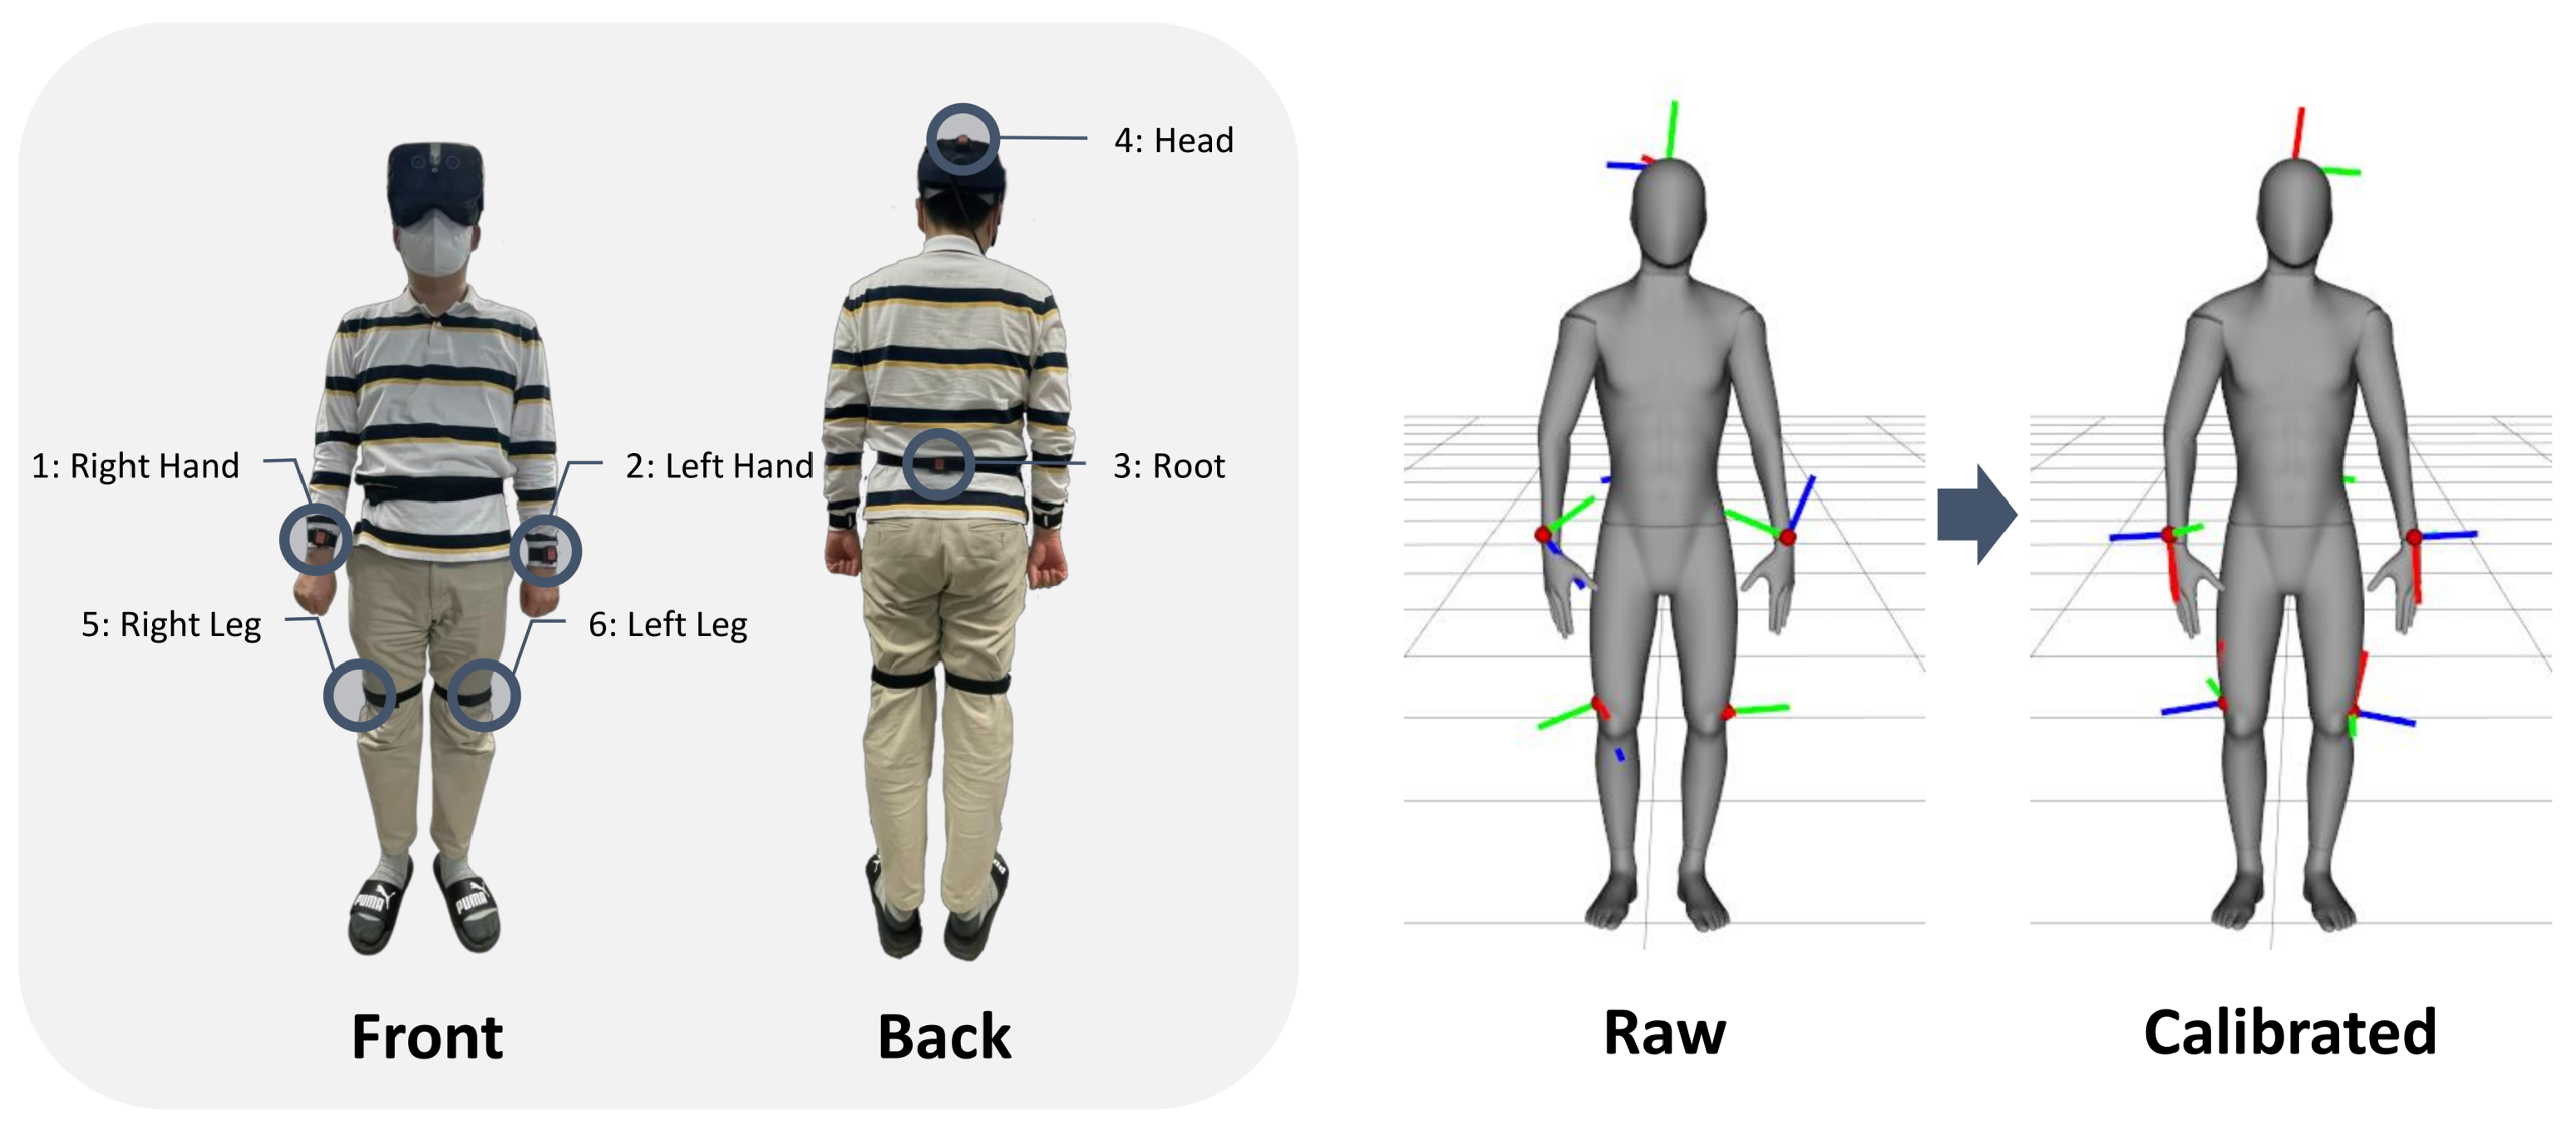 Multi Person Pose Estimation And Tracking: Models, code, and papers -  CatalyzeX